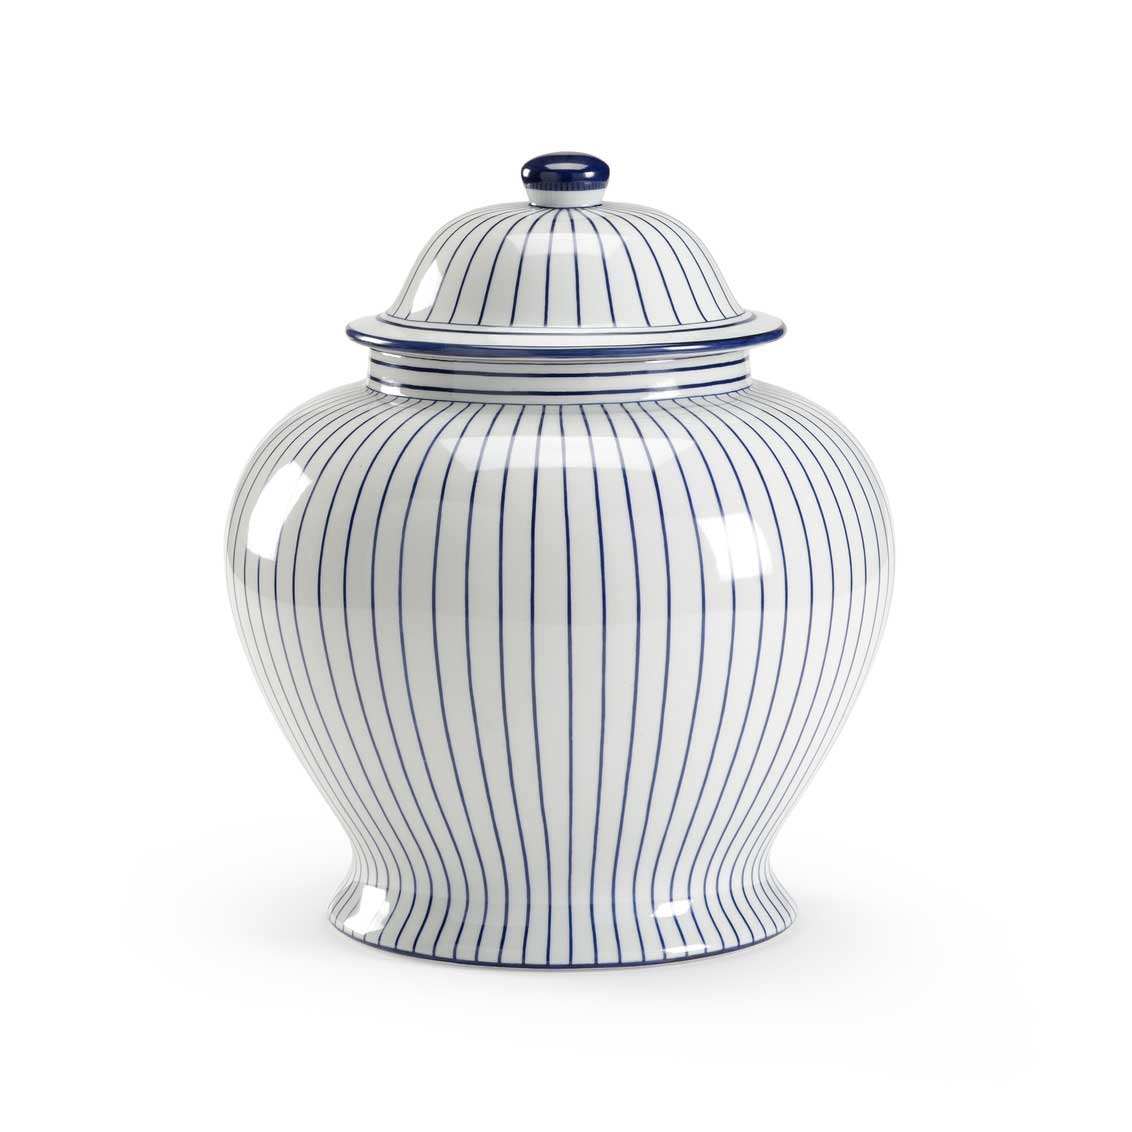 Castle Urn glazed porcelain urn with blue pinstriping from Chelsea House